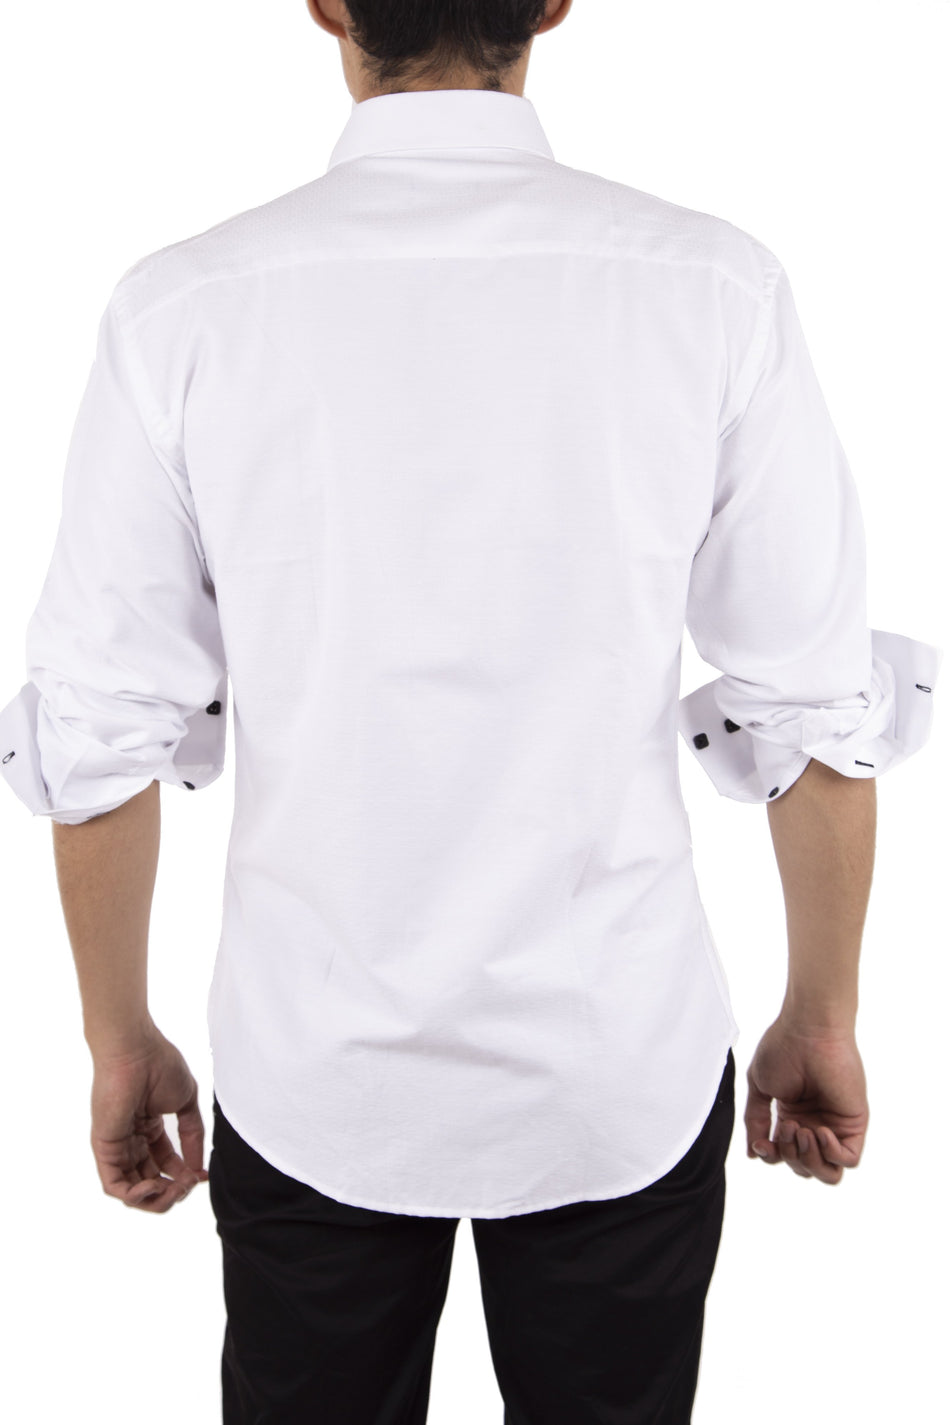 Solid White With Contrast Buttons Long Sleeve Dress Shirt